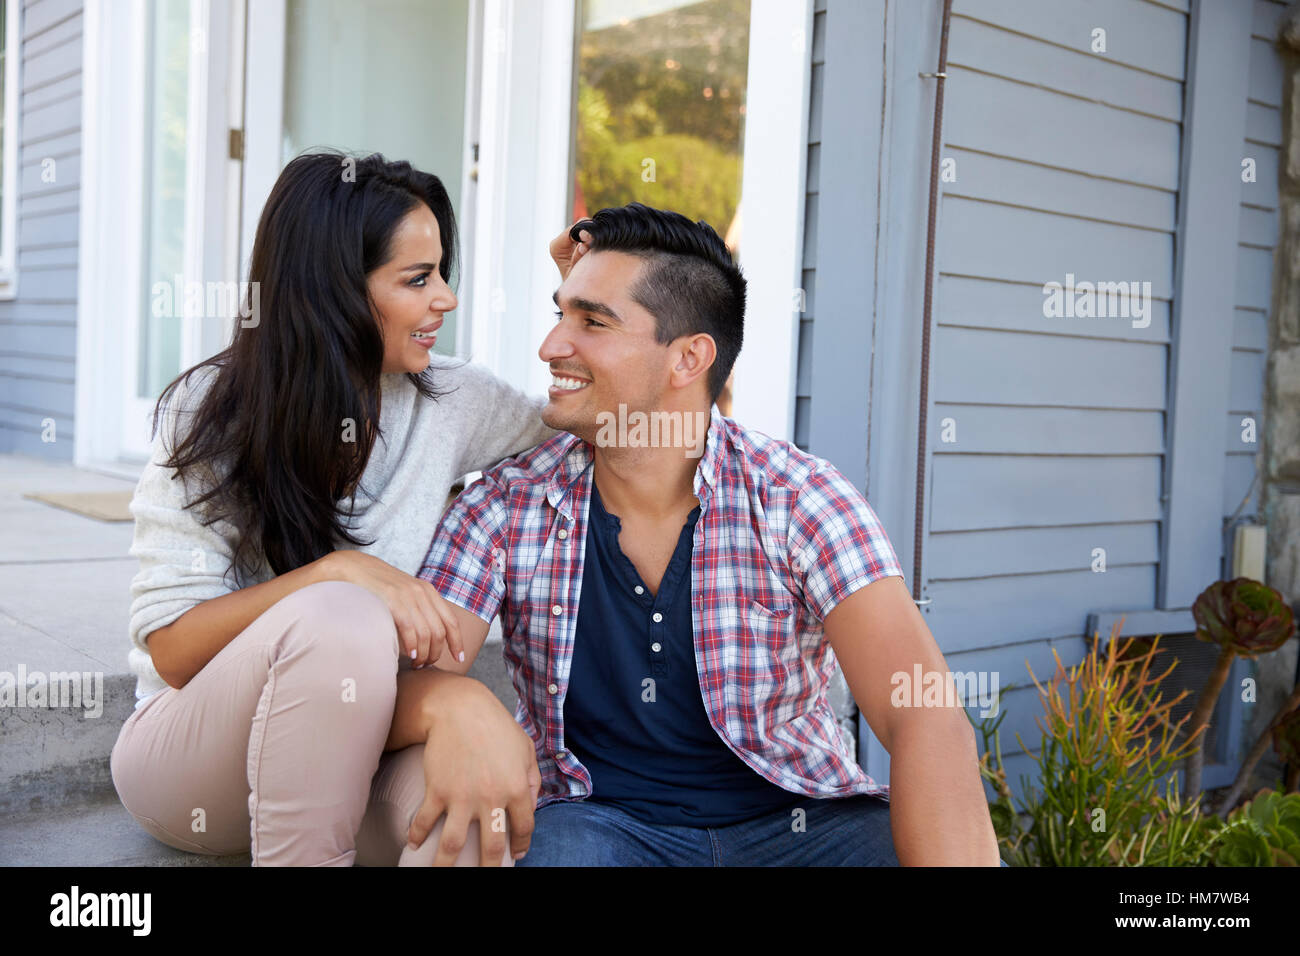 Affectionate Couple Sitting on Steps Outside Home Banque D'Images